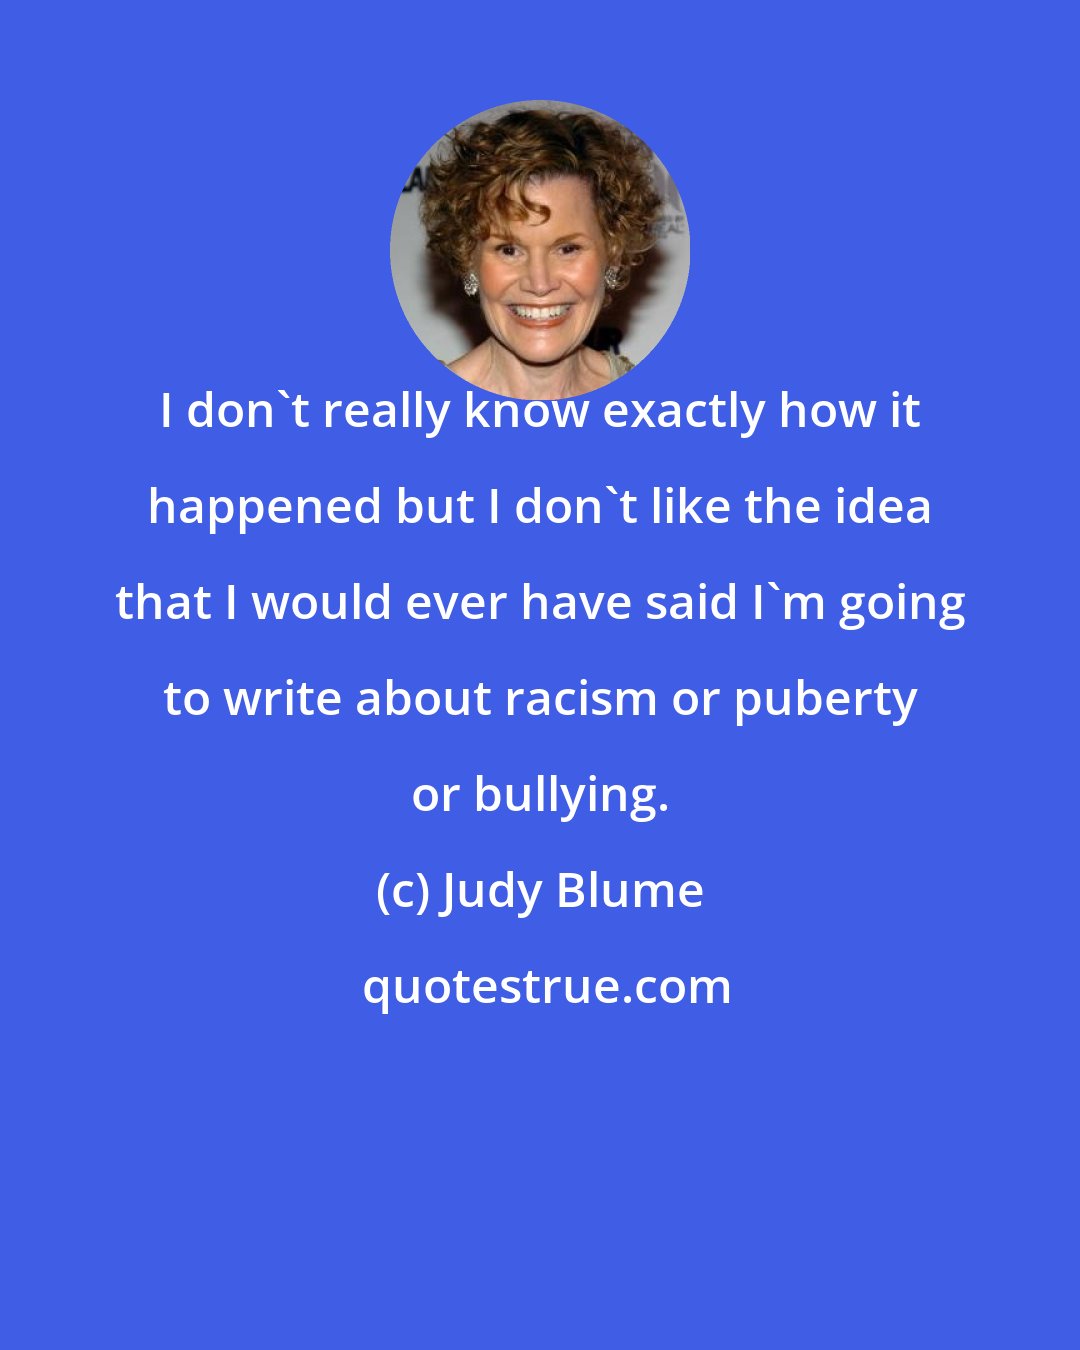 Judy Blume: I don't really know exactly how it happened but I don't like the idea that I would ever have said I'm going to write about racism or puberty or bullying.